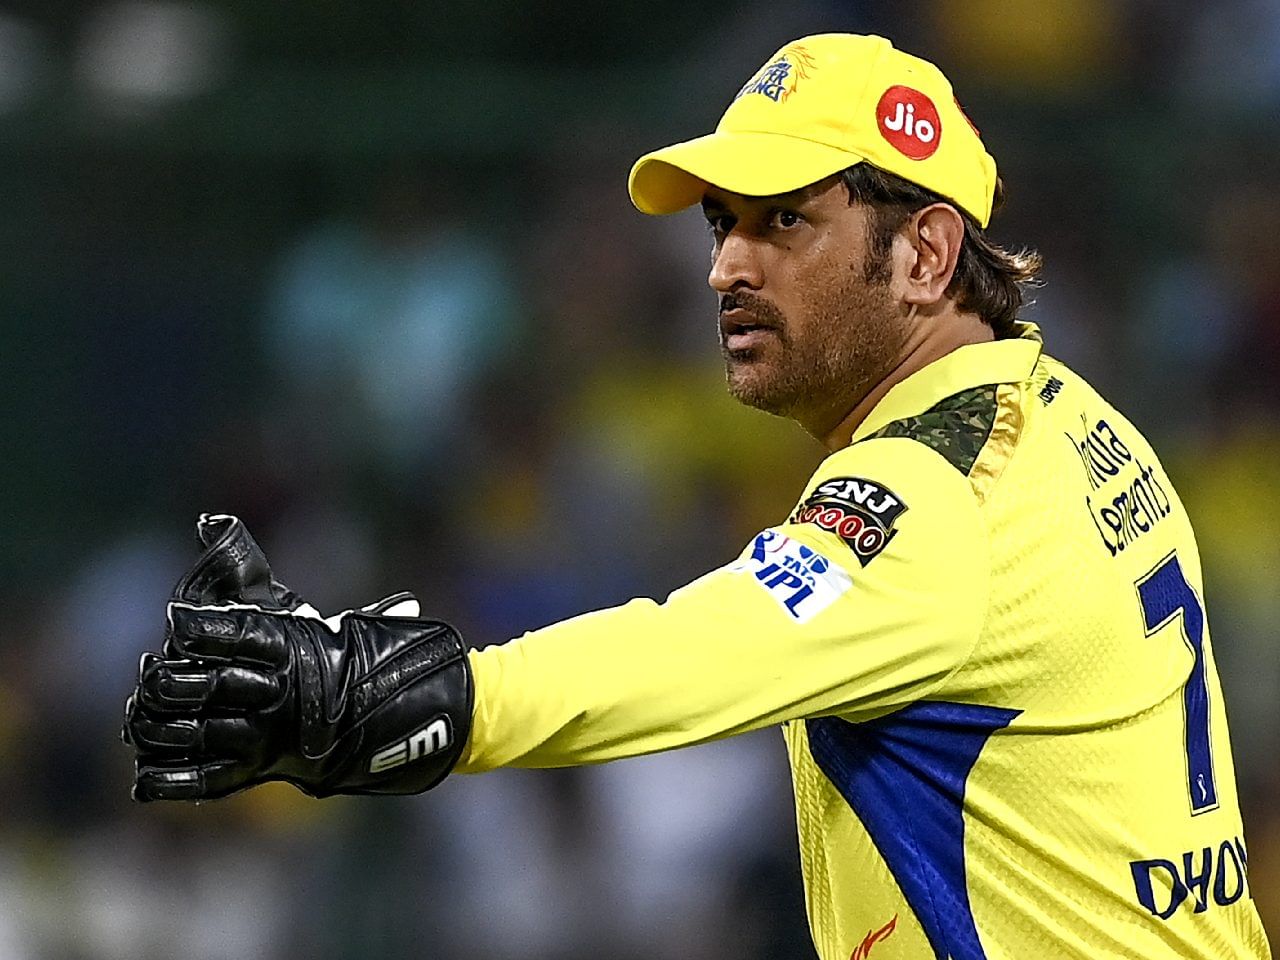 ‘I can be an annoying captain’: MS Dhoni after guiding CSK to 10th IPL final